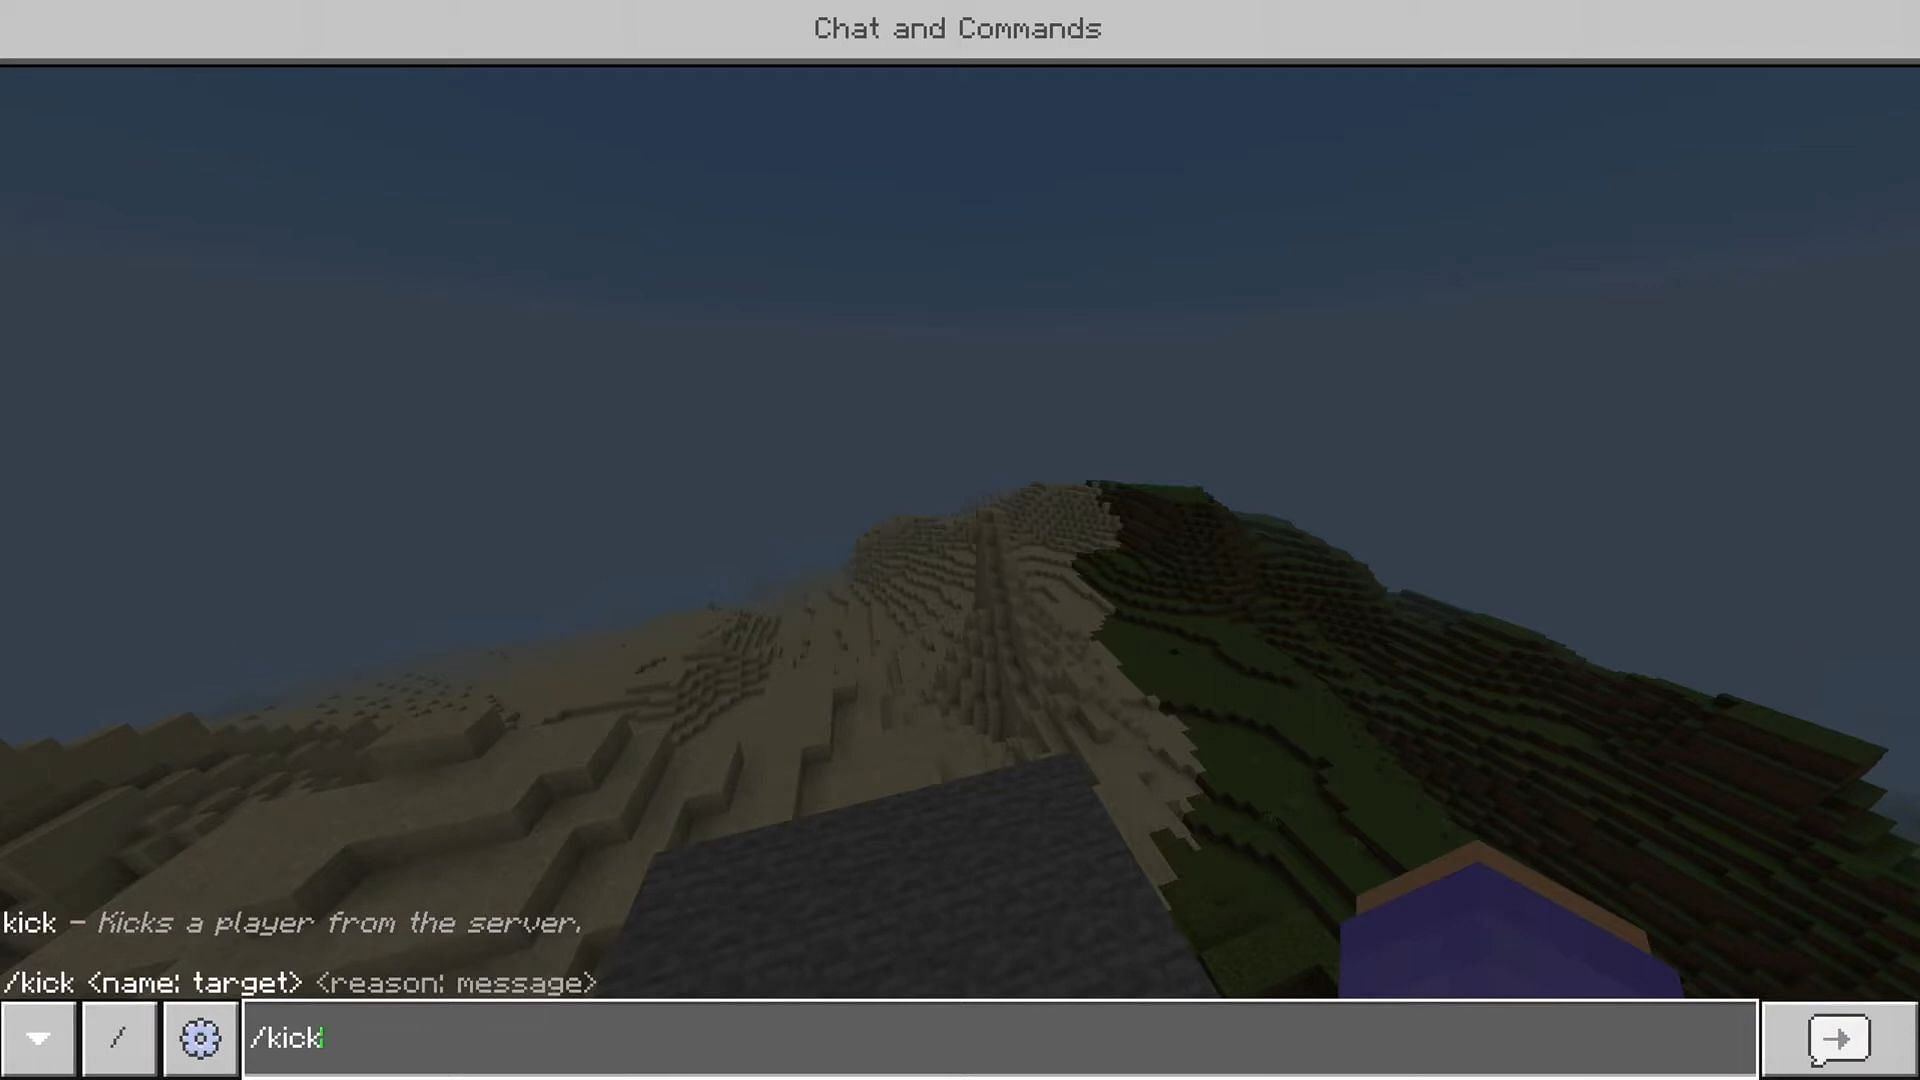 The /kick command swiftly boots players from a multiplayer server (Image via JE36 - Gaming/YouTube)